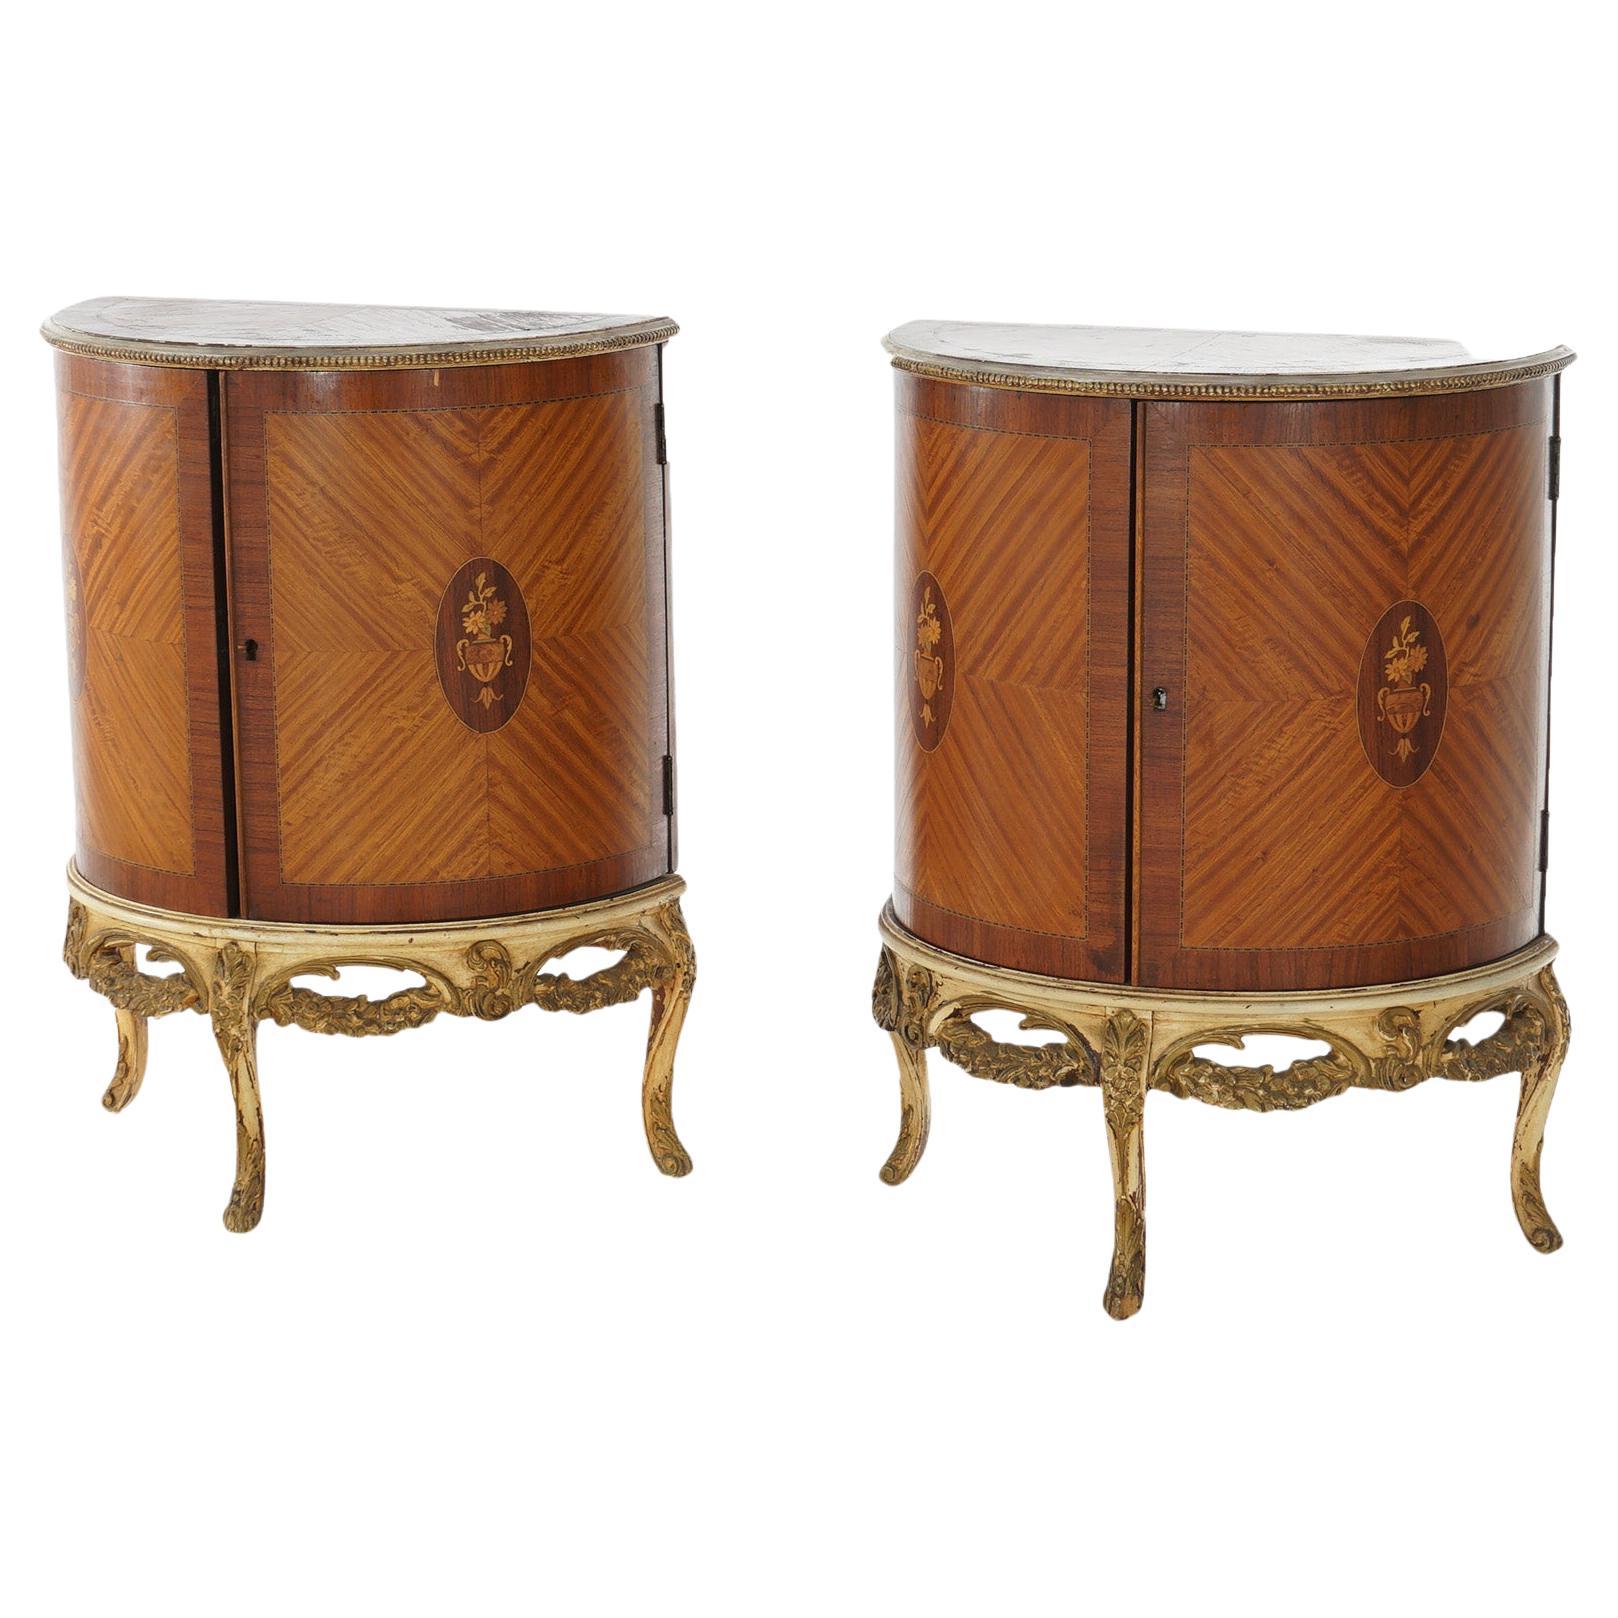 Two Antique Antique French Satinwood Inlaid Marquetry Demilune Side Tables C1920 For Sale